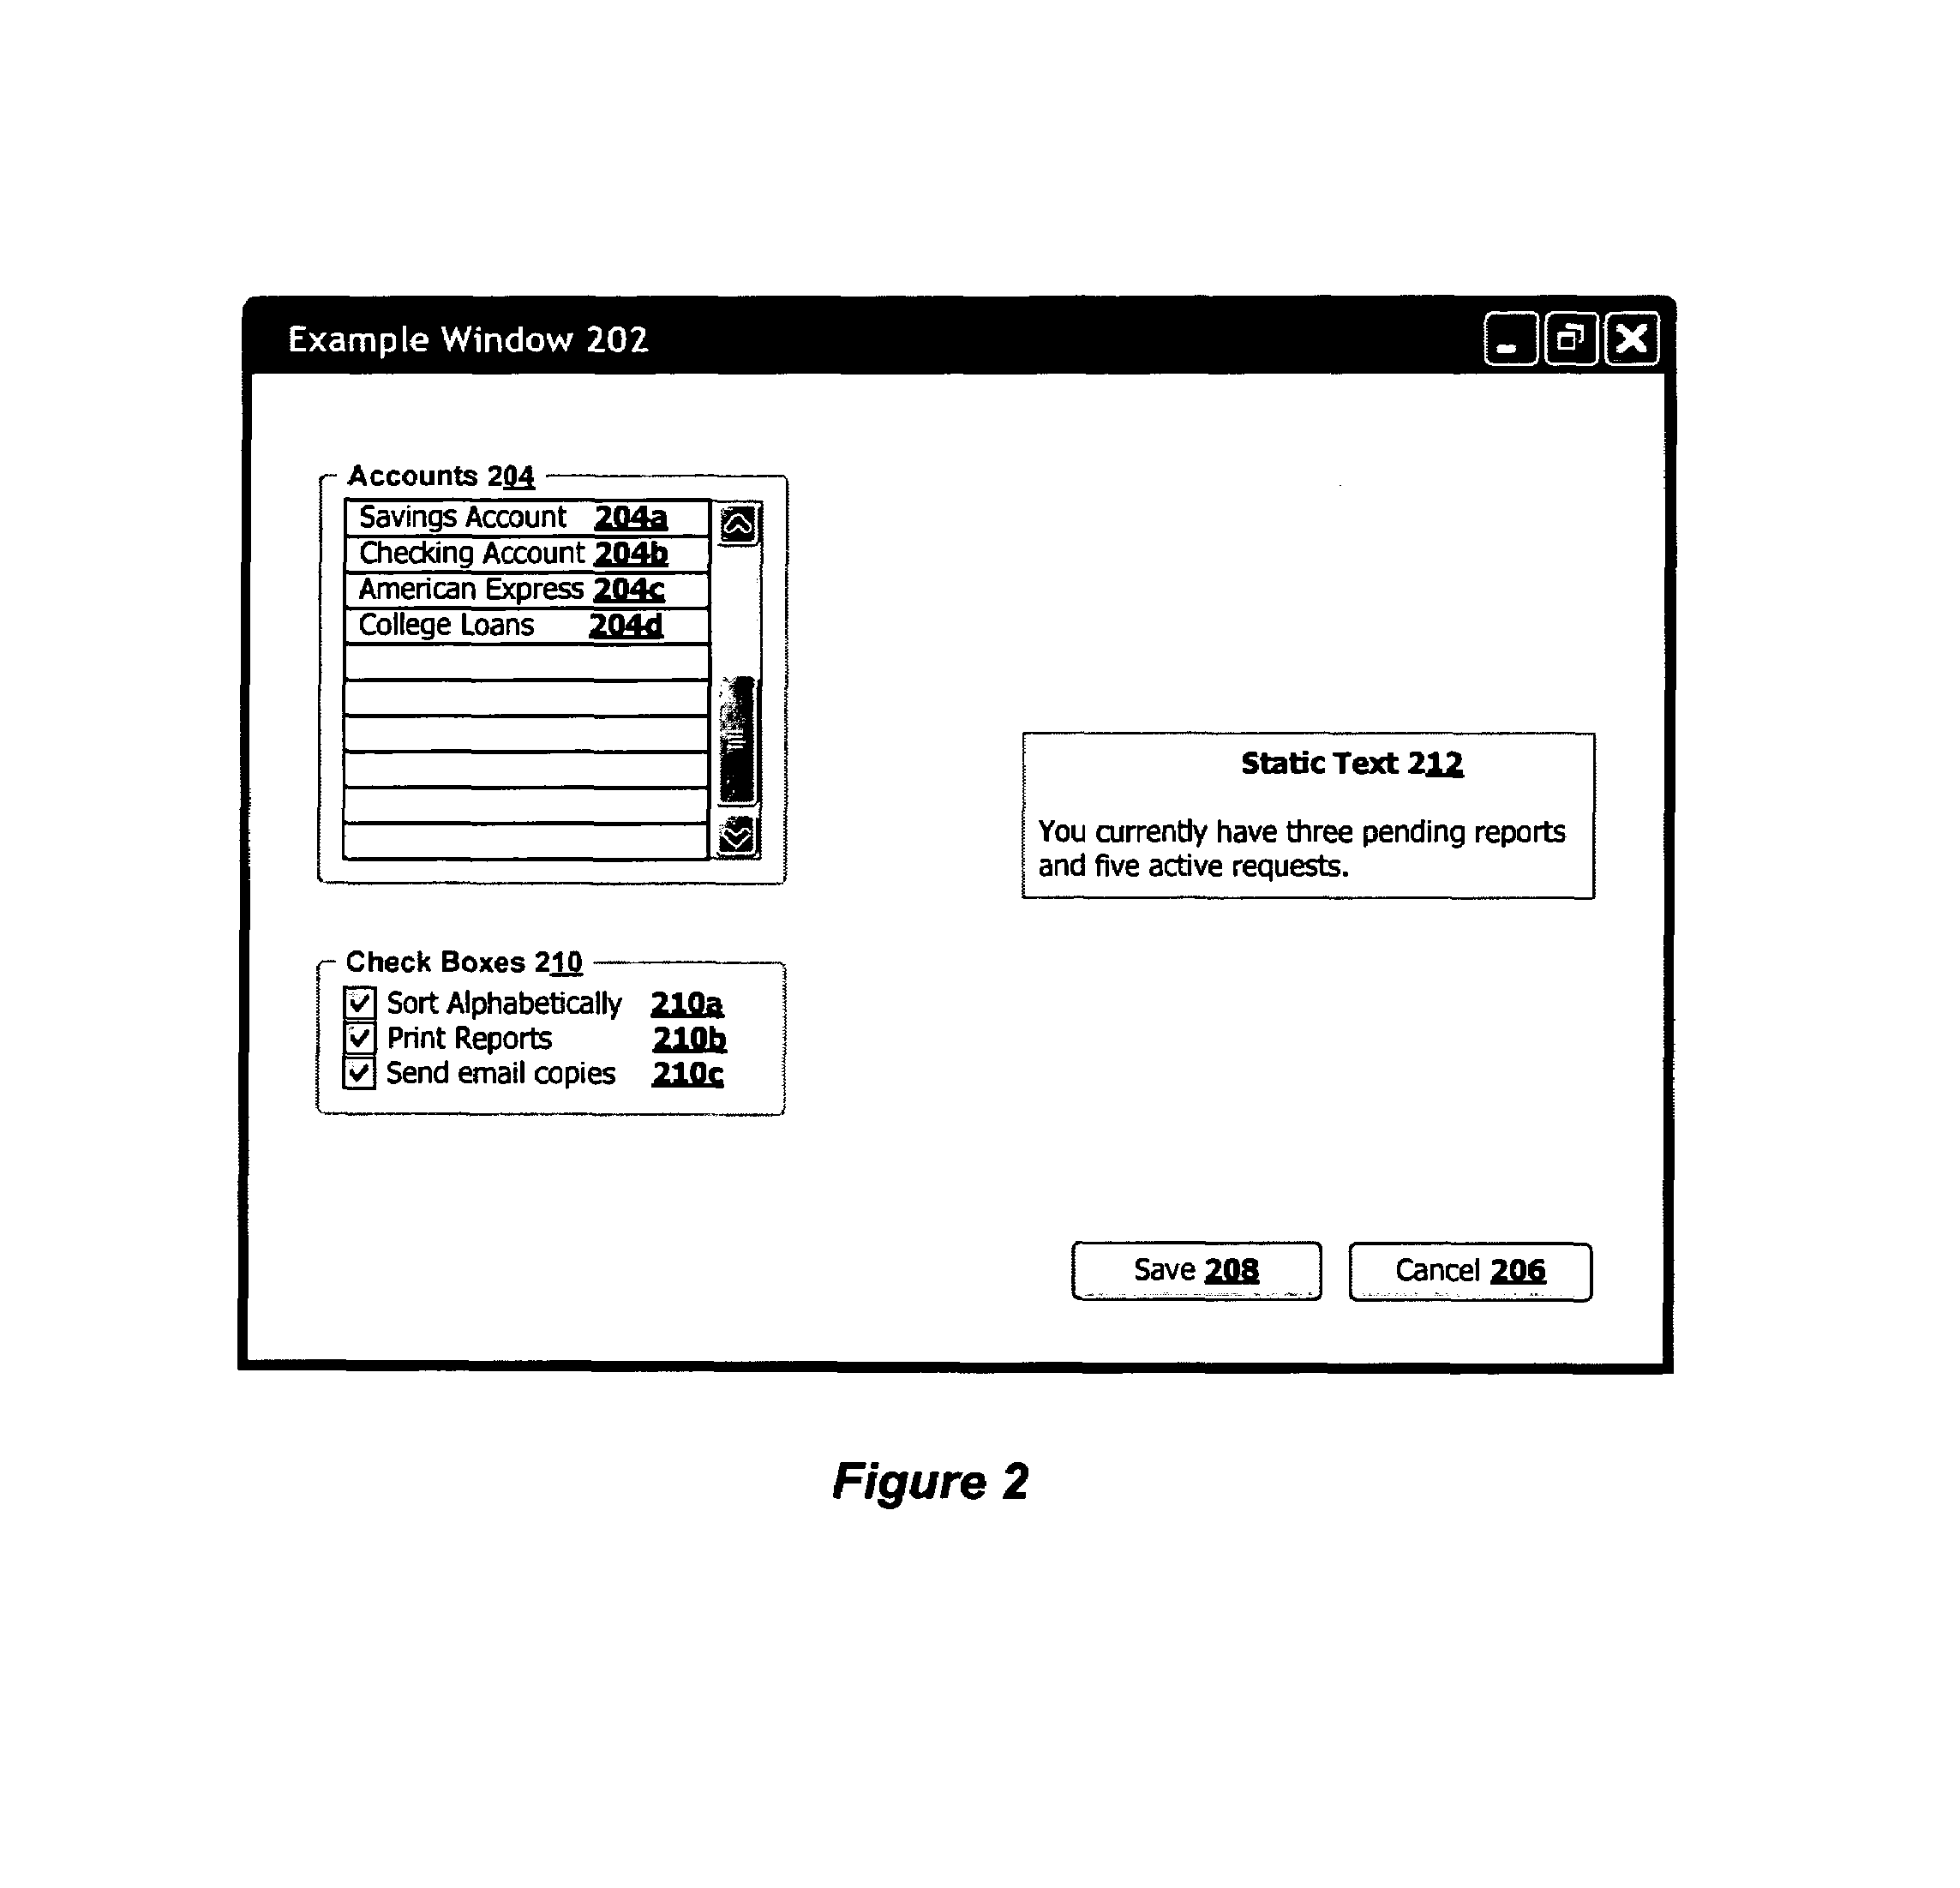 Method and system for renderring application text in one or more alternative languages